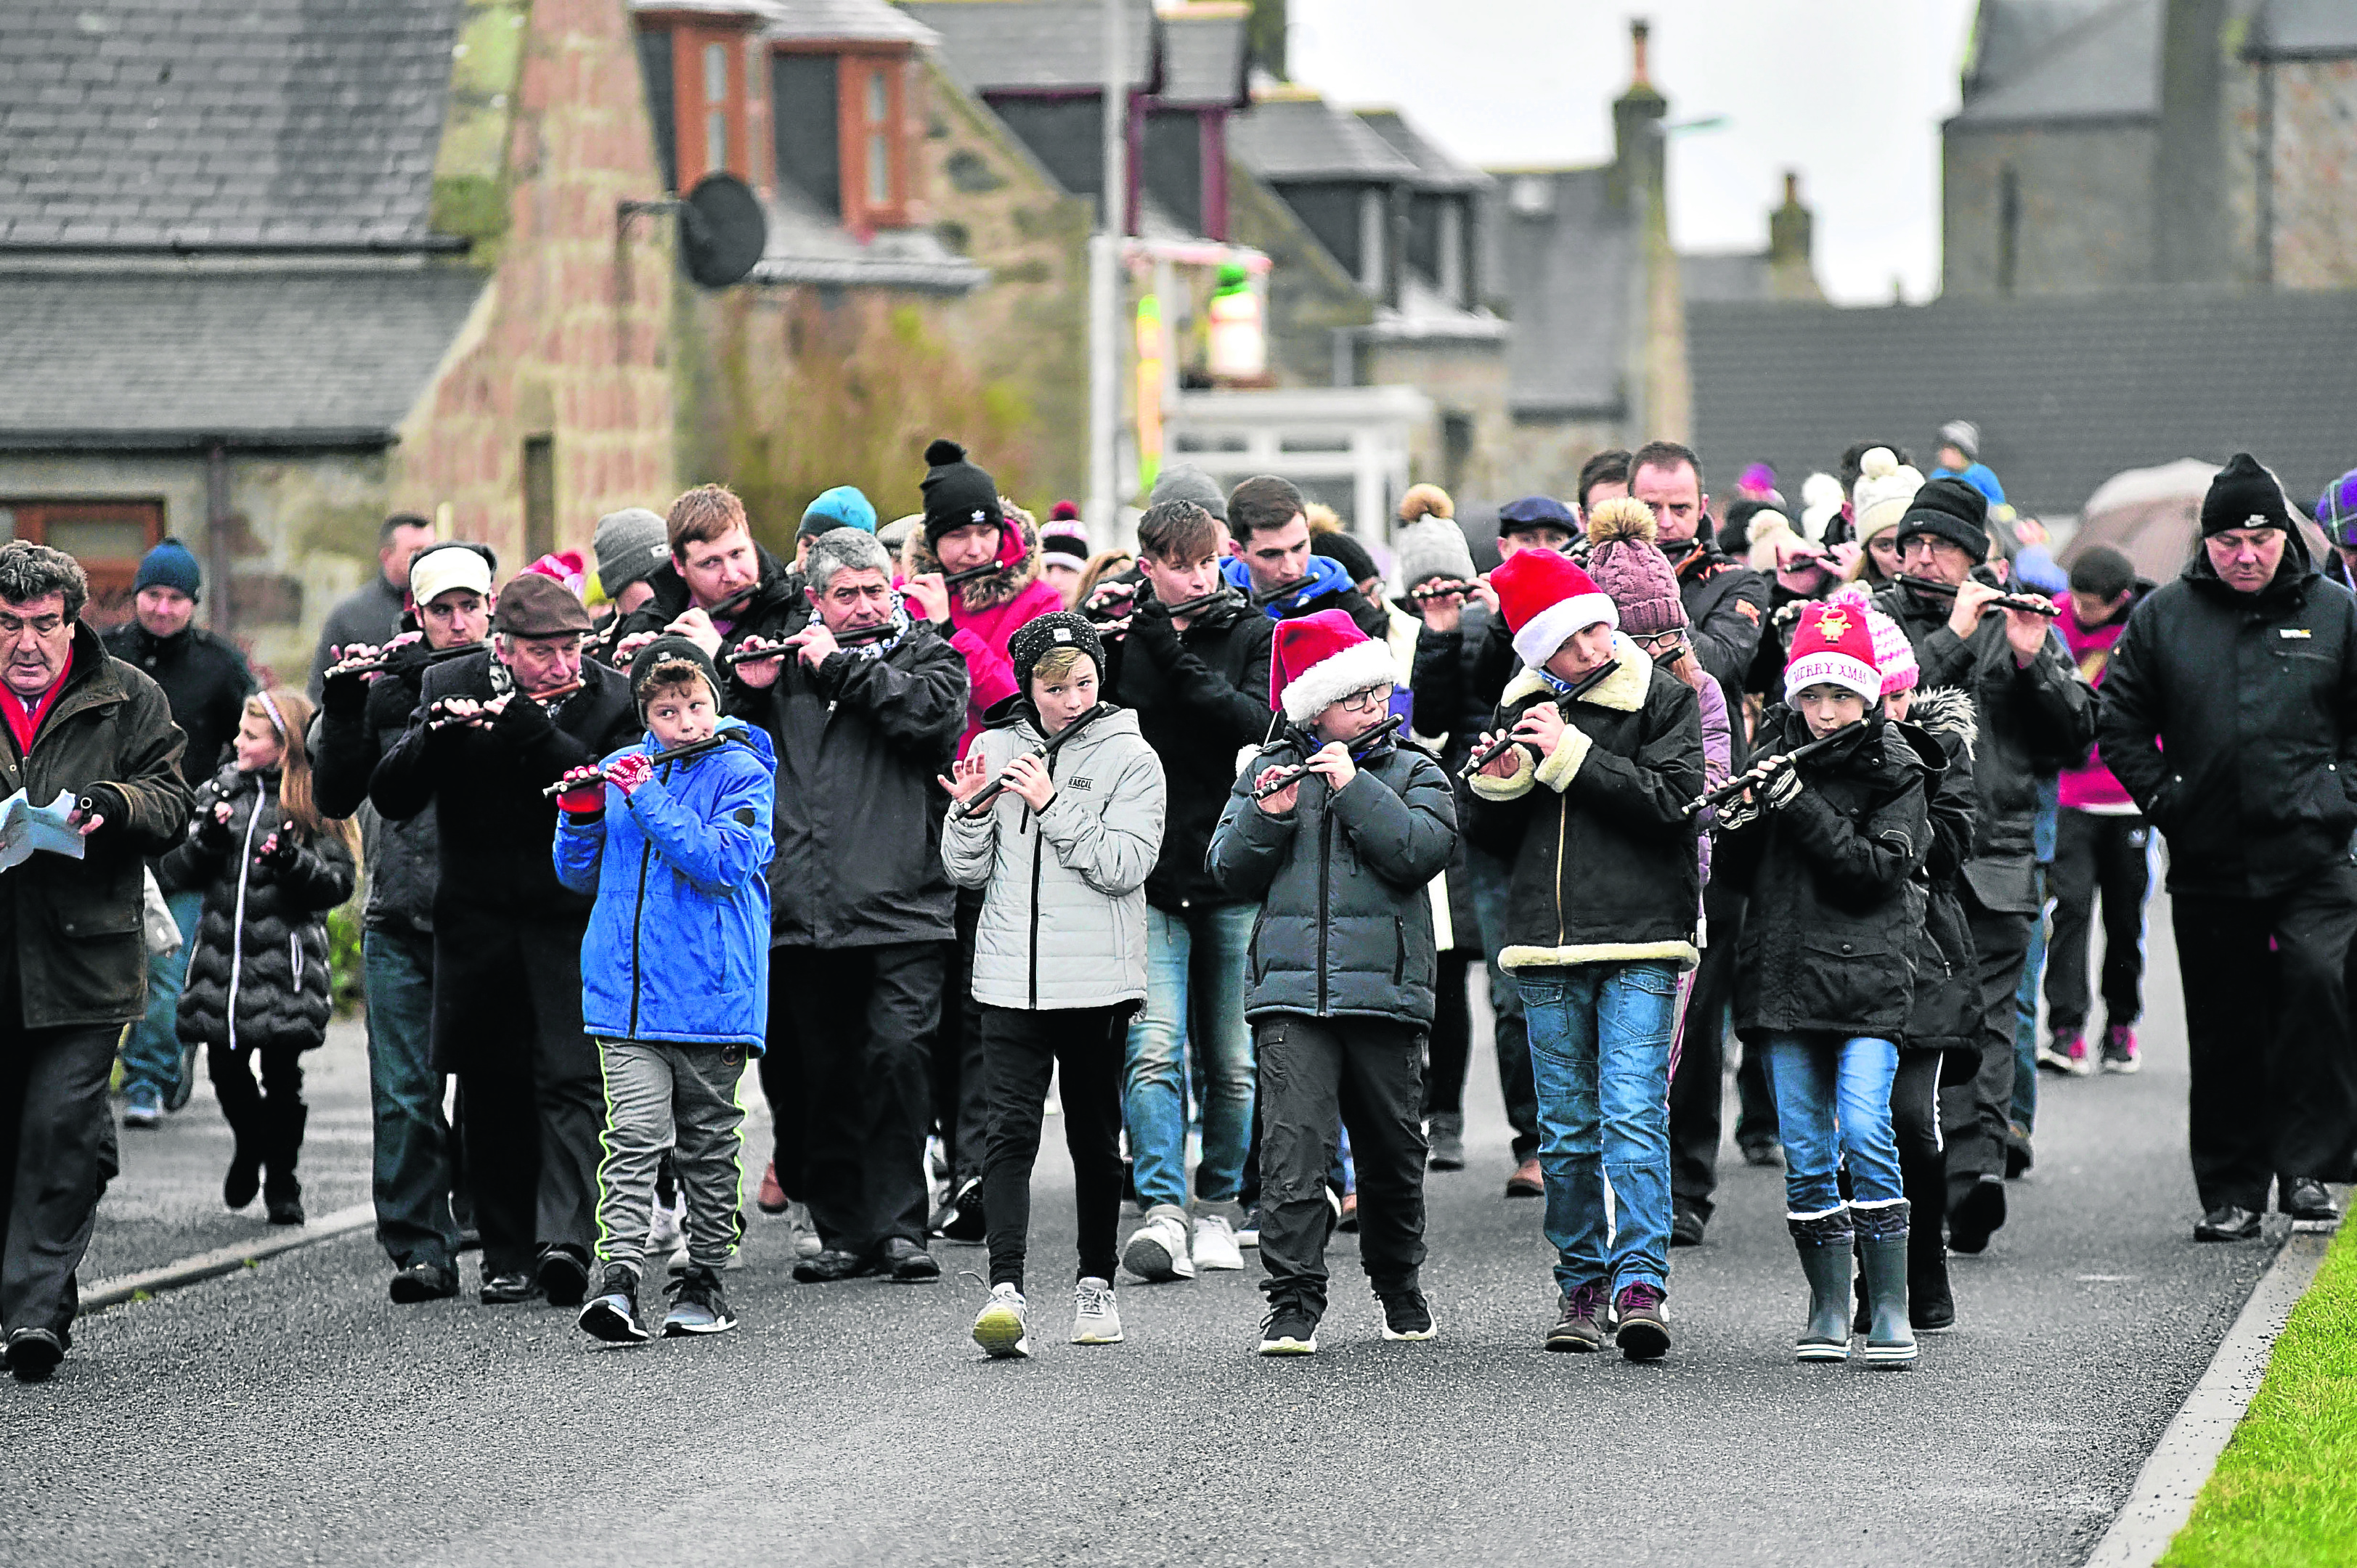 The flute band leads the annual Christmas Day walk